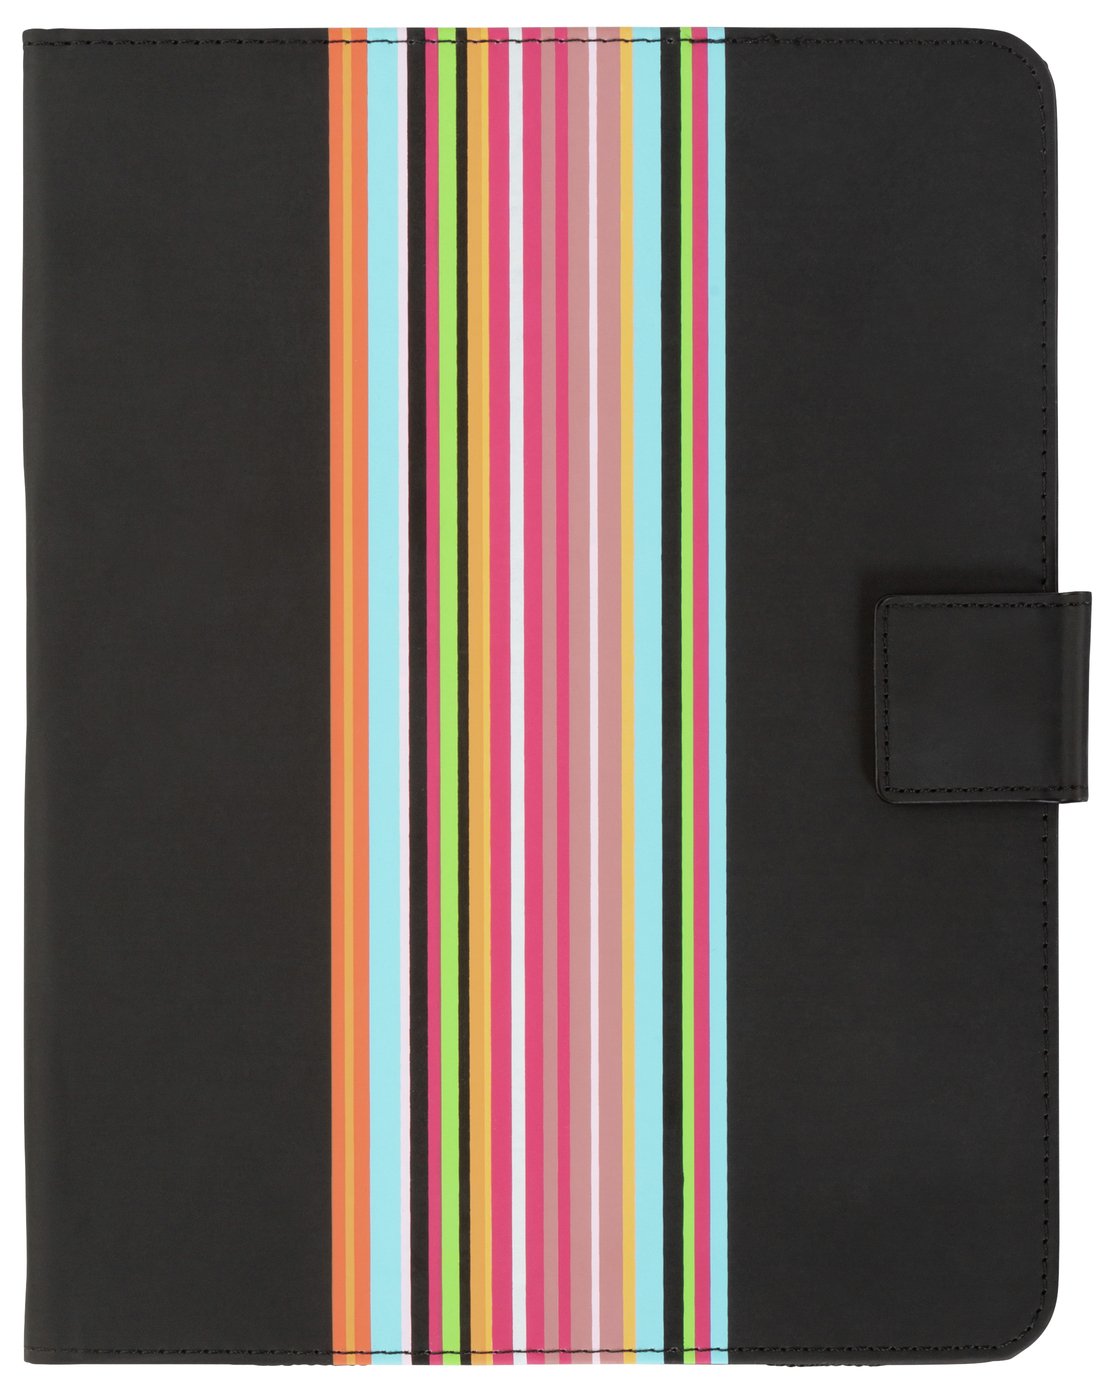 Universal 9/10 Inch Striped PVC Tablet Case Review